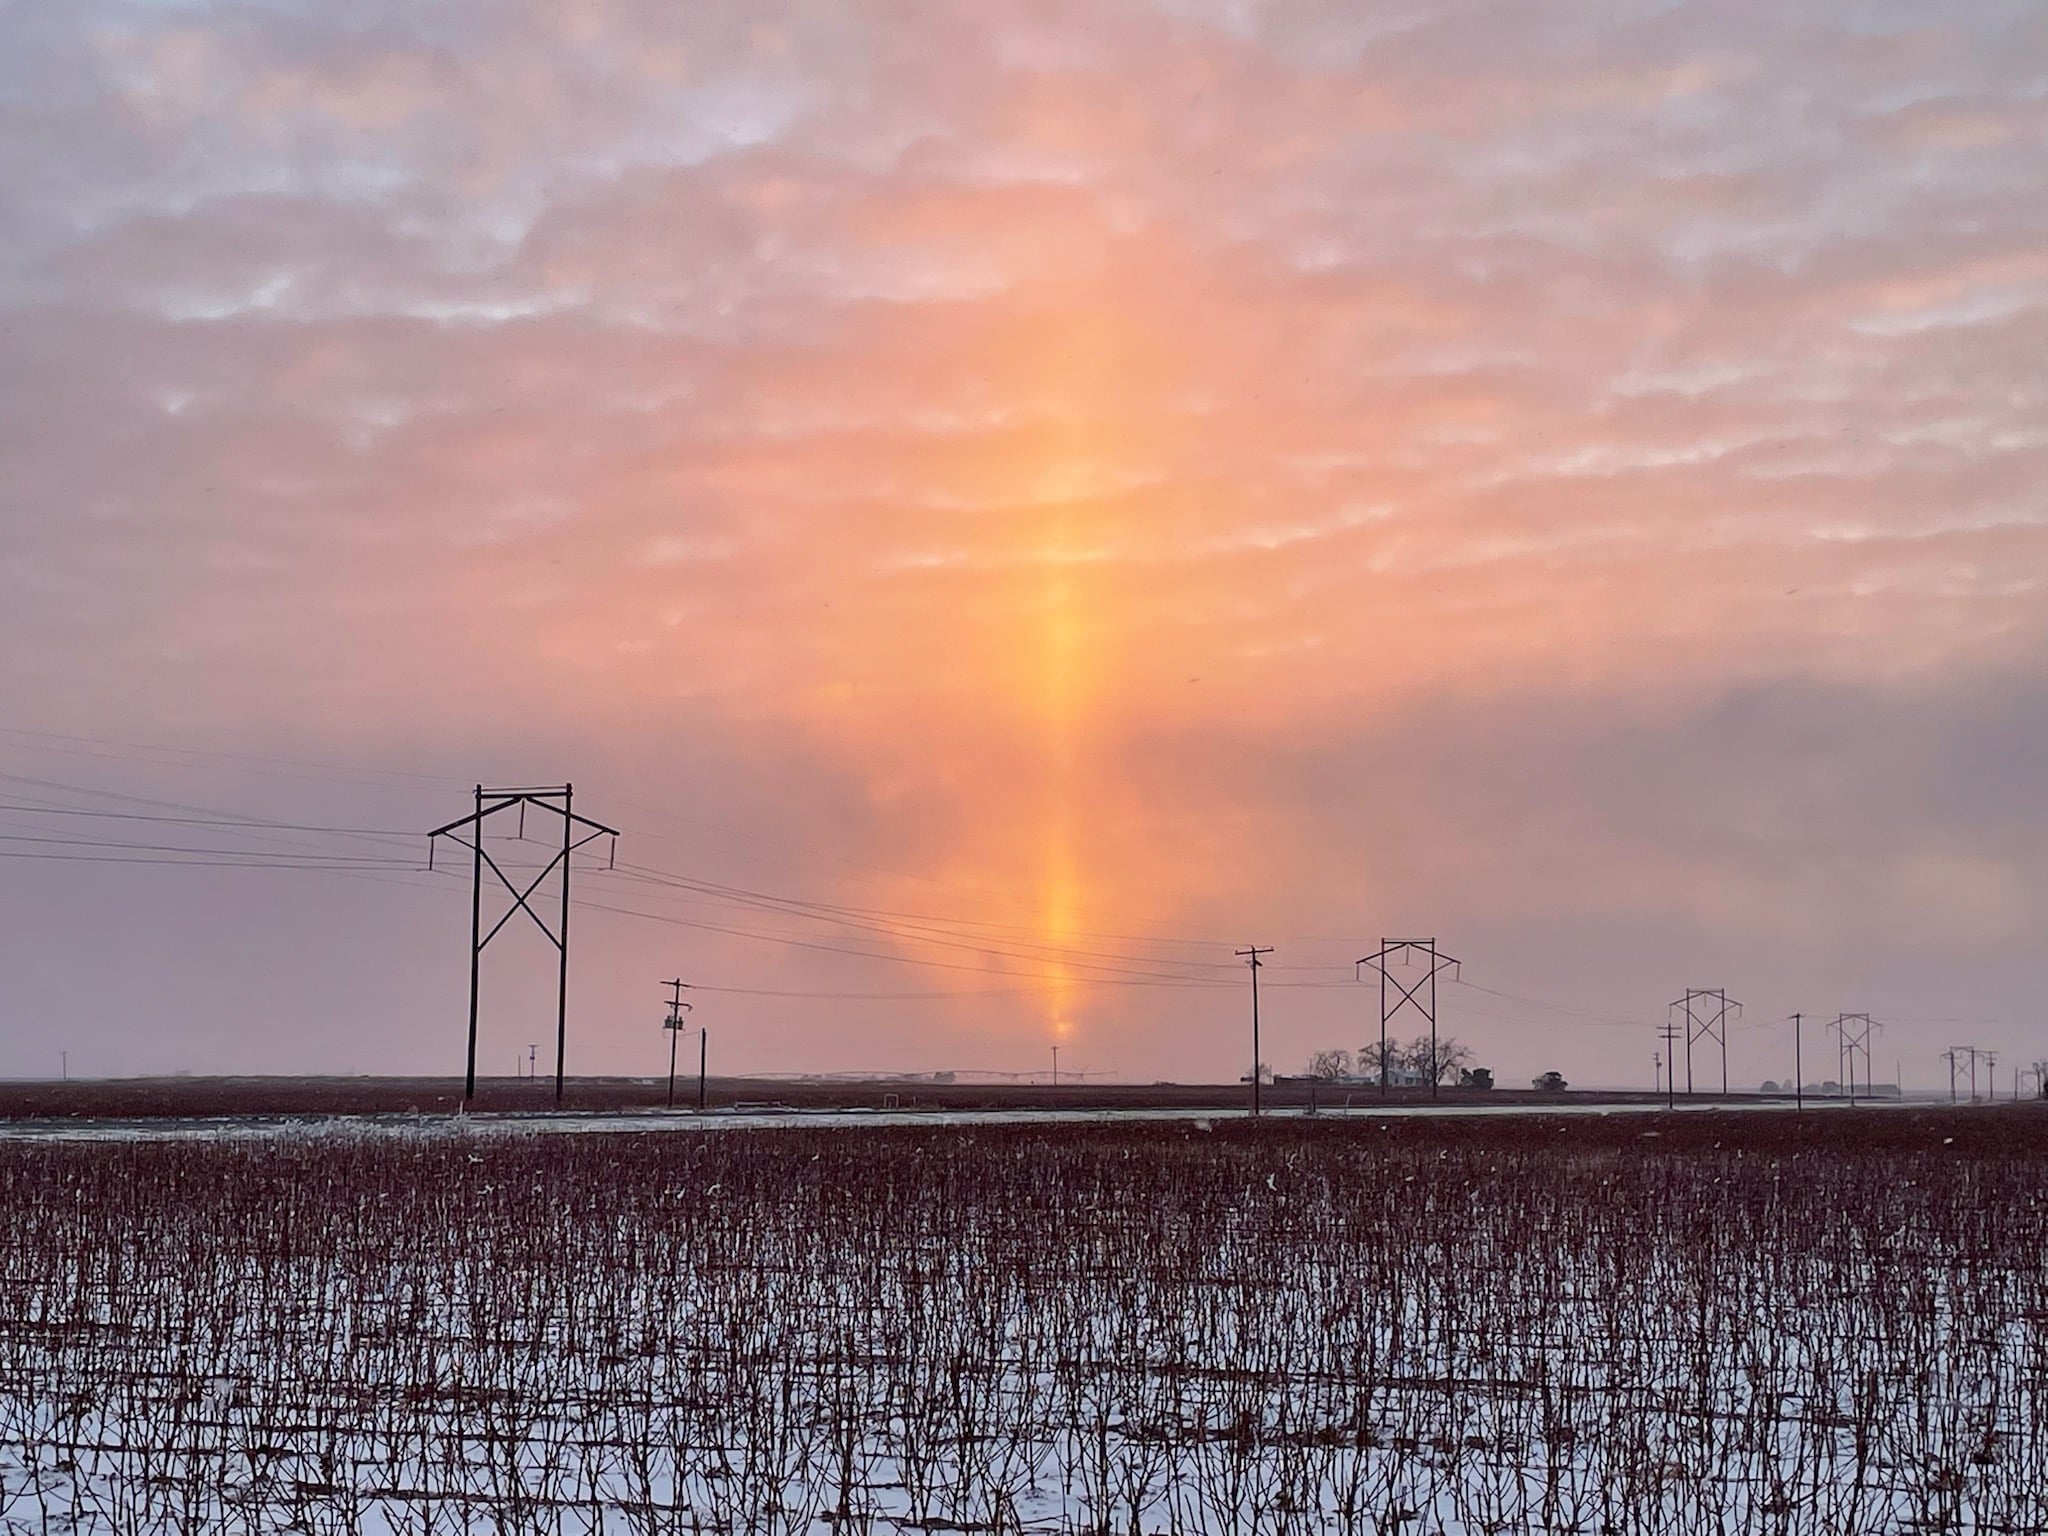 It's a Sun pillar! These are more commonly seen up in the Arctic at sunrise or sunset, but it was just cold enough and just clear enough to spy one in West Texas on Thursday evening. The picture is courtesy of the West Texas Mesonet.